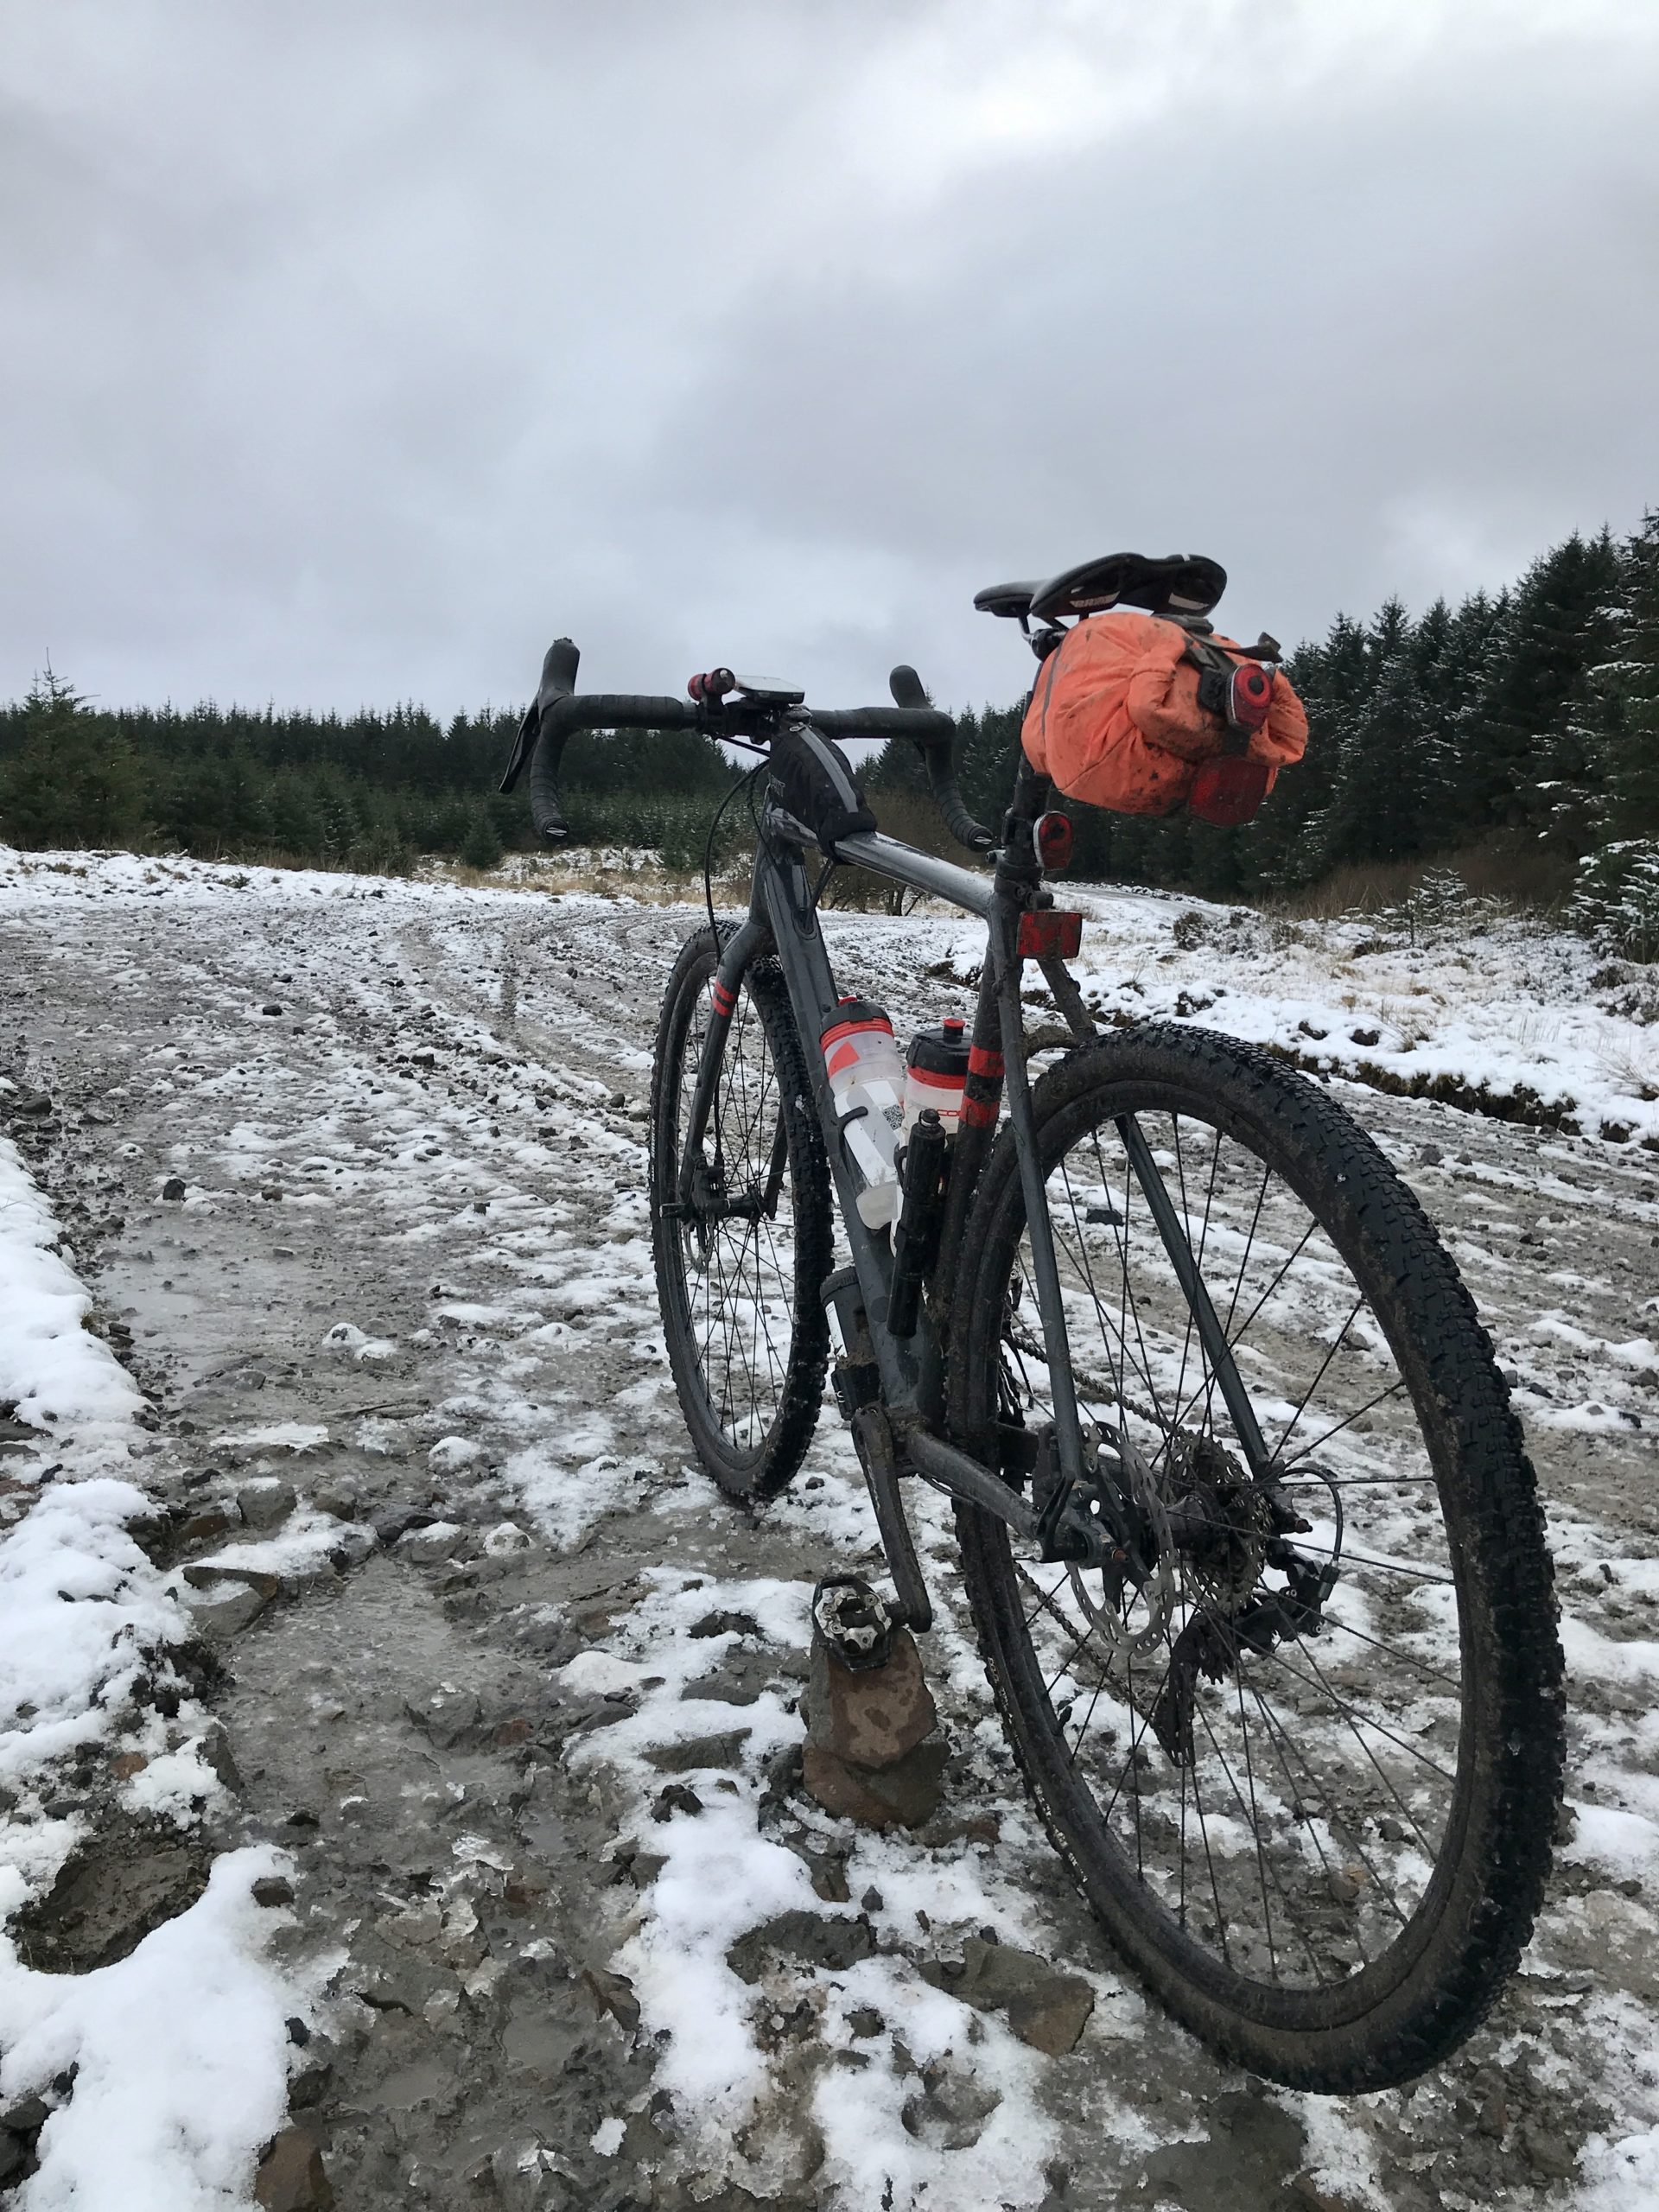 Nic Festive 500 off road South Wales